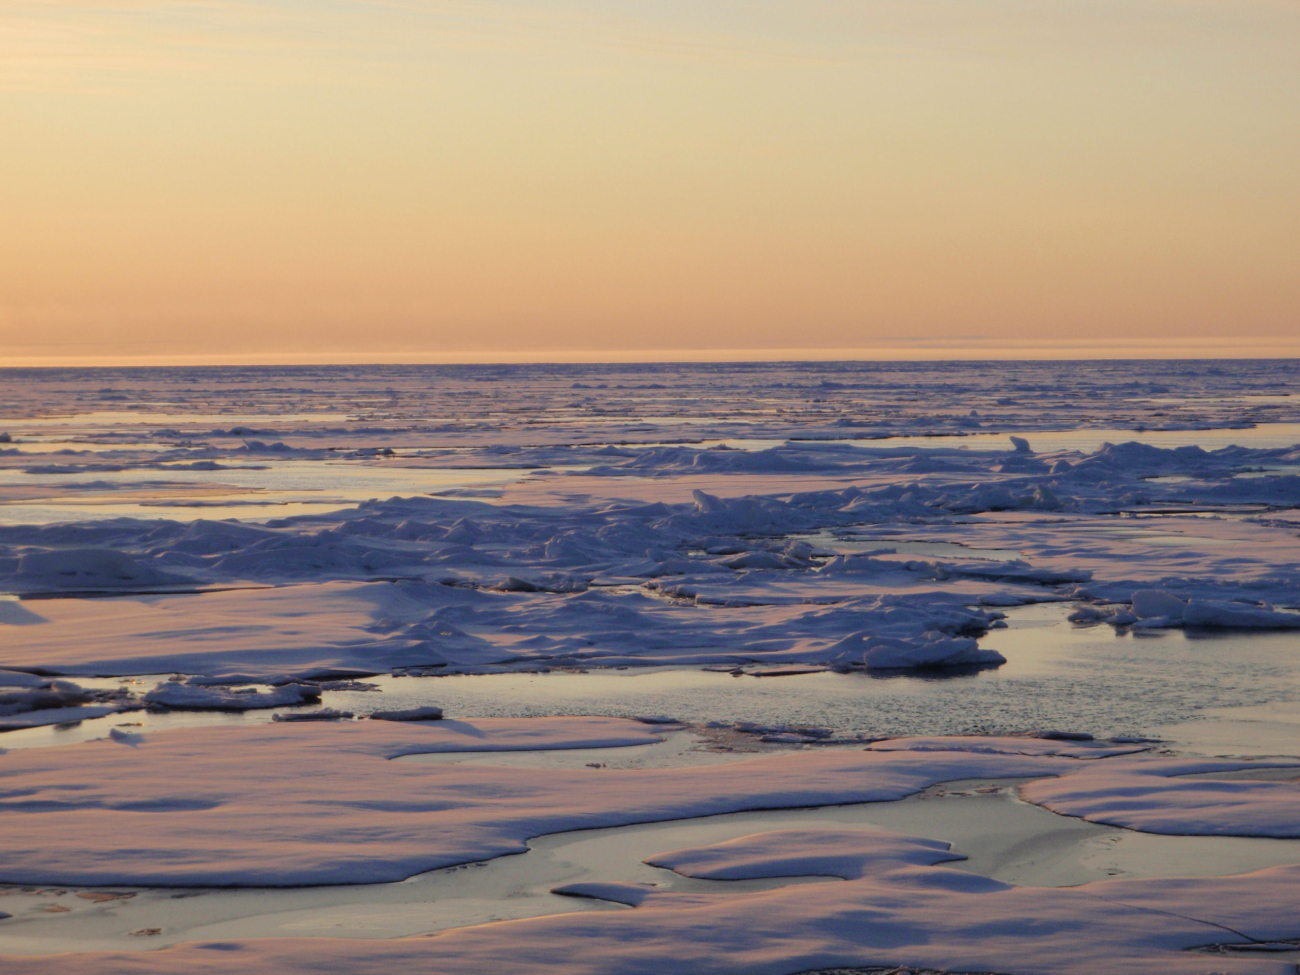 Ice floes freezing suffused with a light golden glow